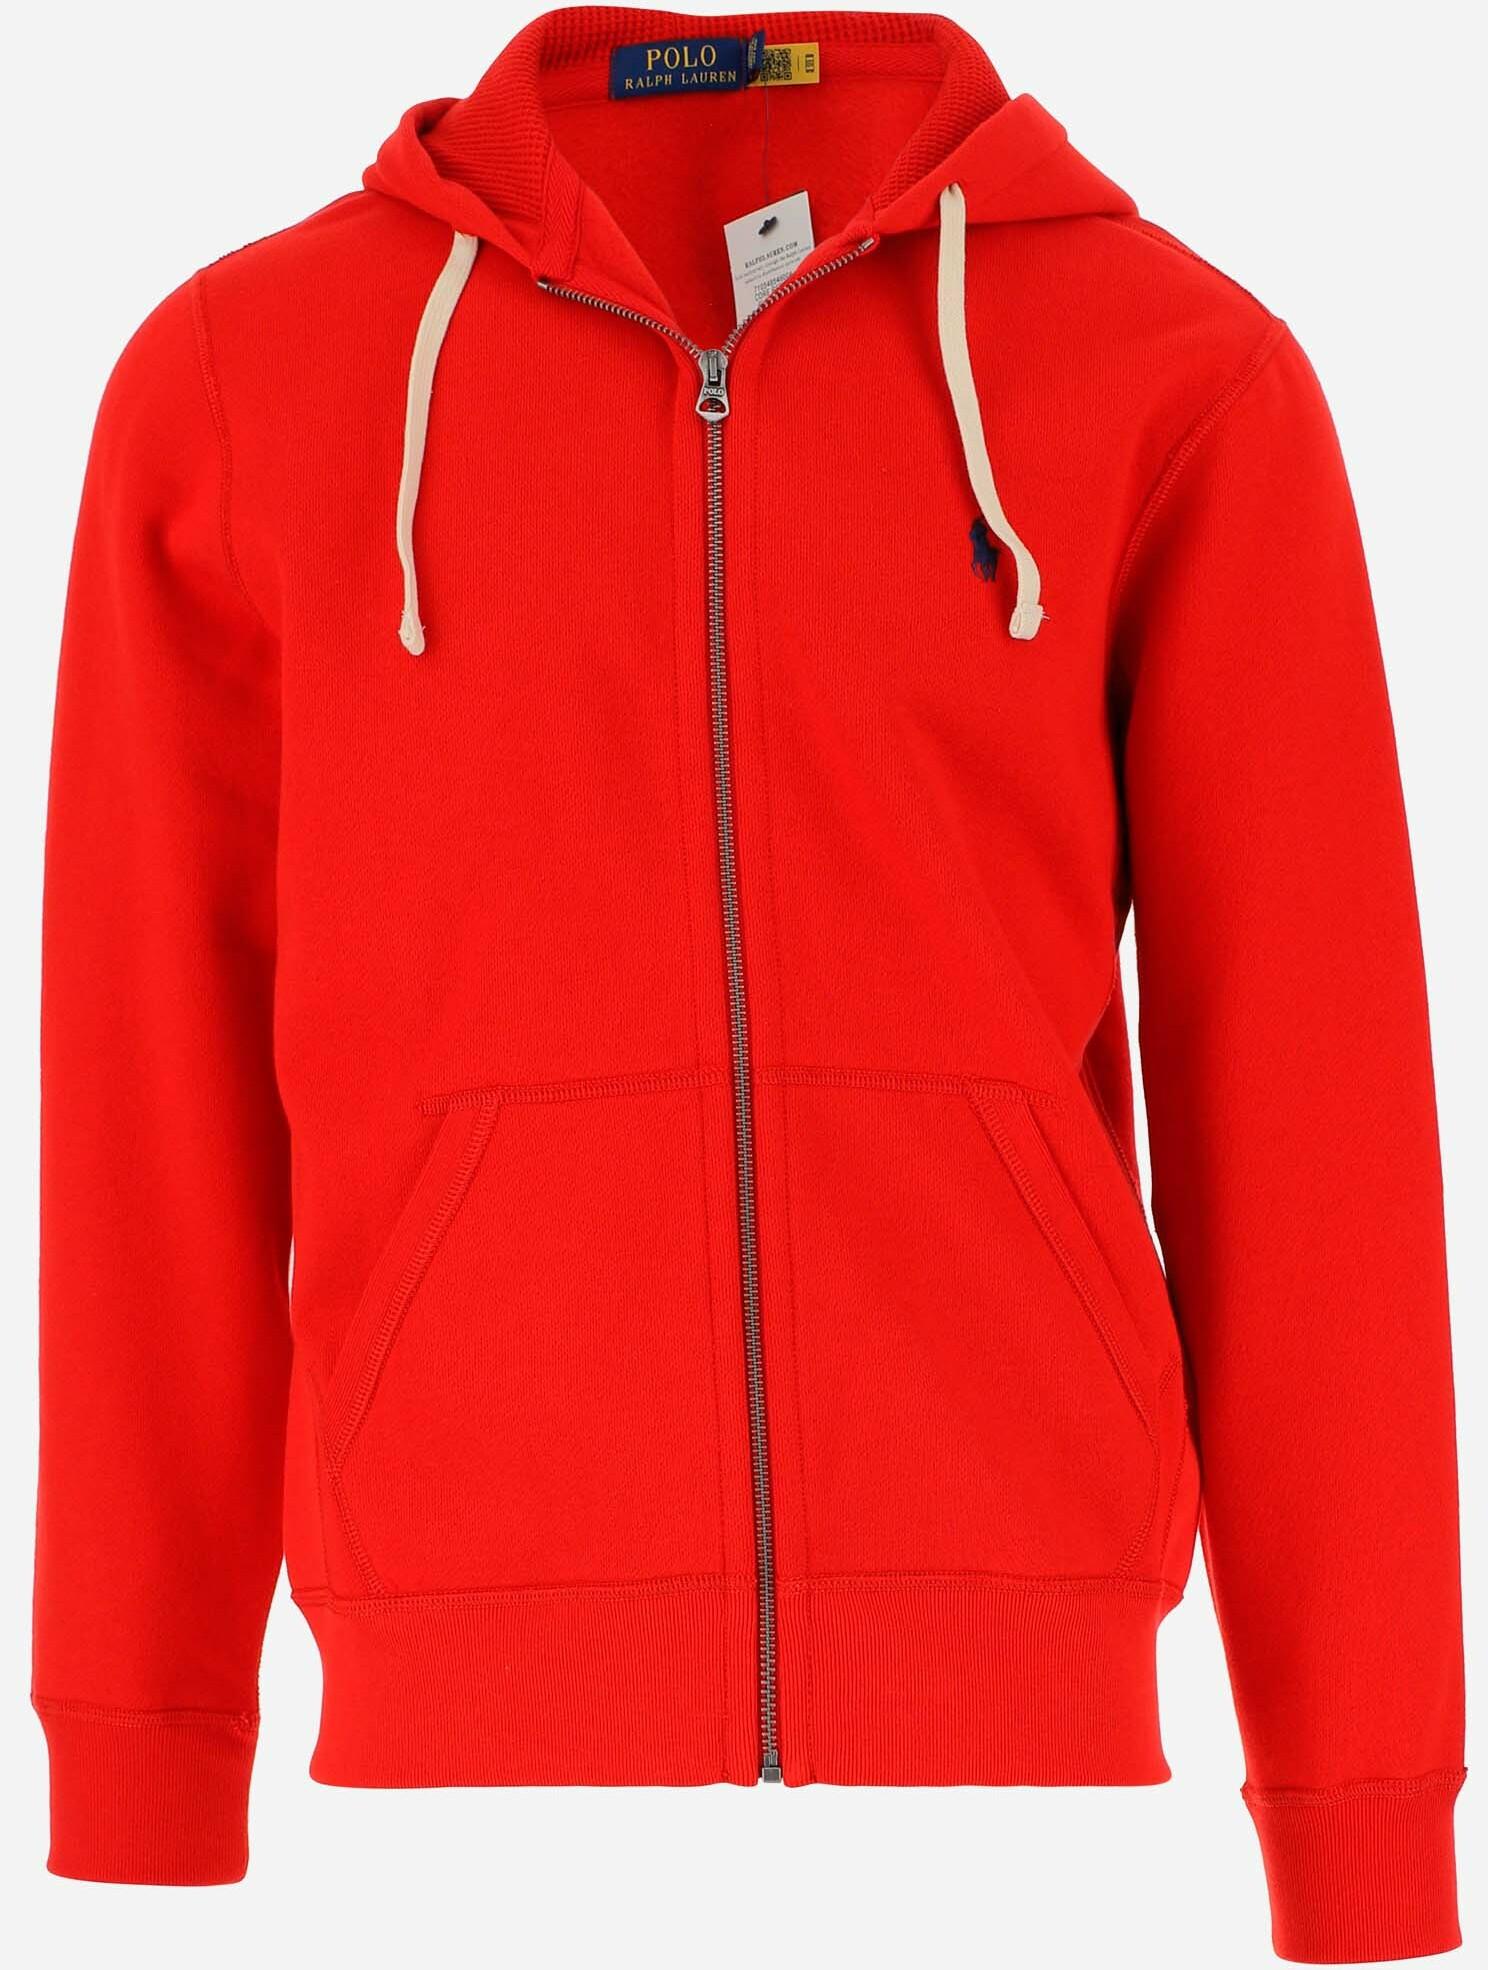 Red Polo Zip up hoodie